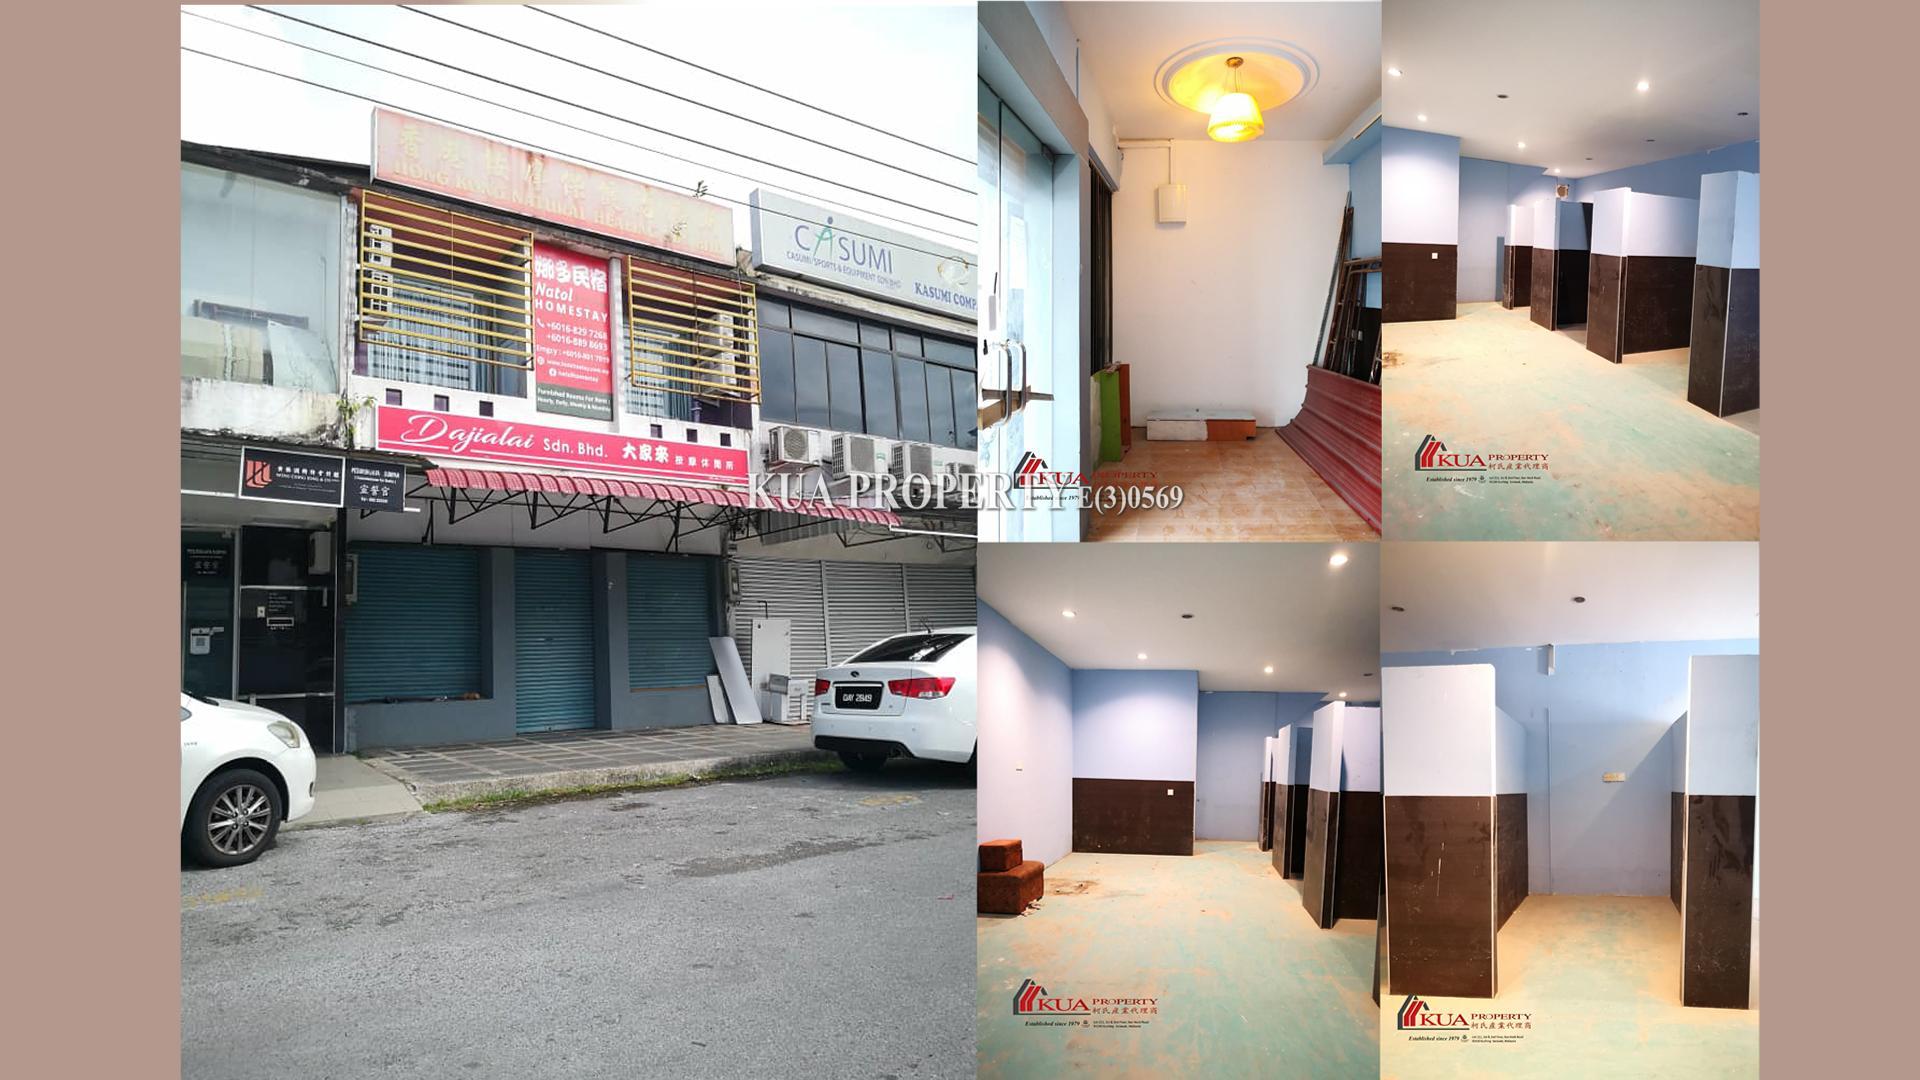 Ground Floor Intermediate Shoplot For Rent! Located at Jalan Ong Tiang Swee, Rock Road